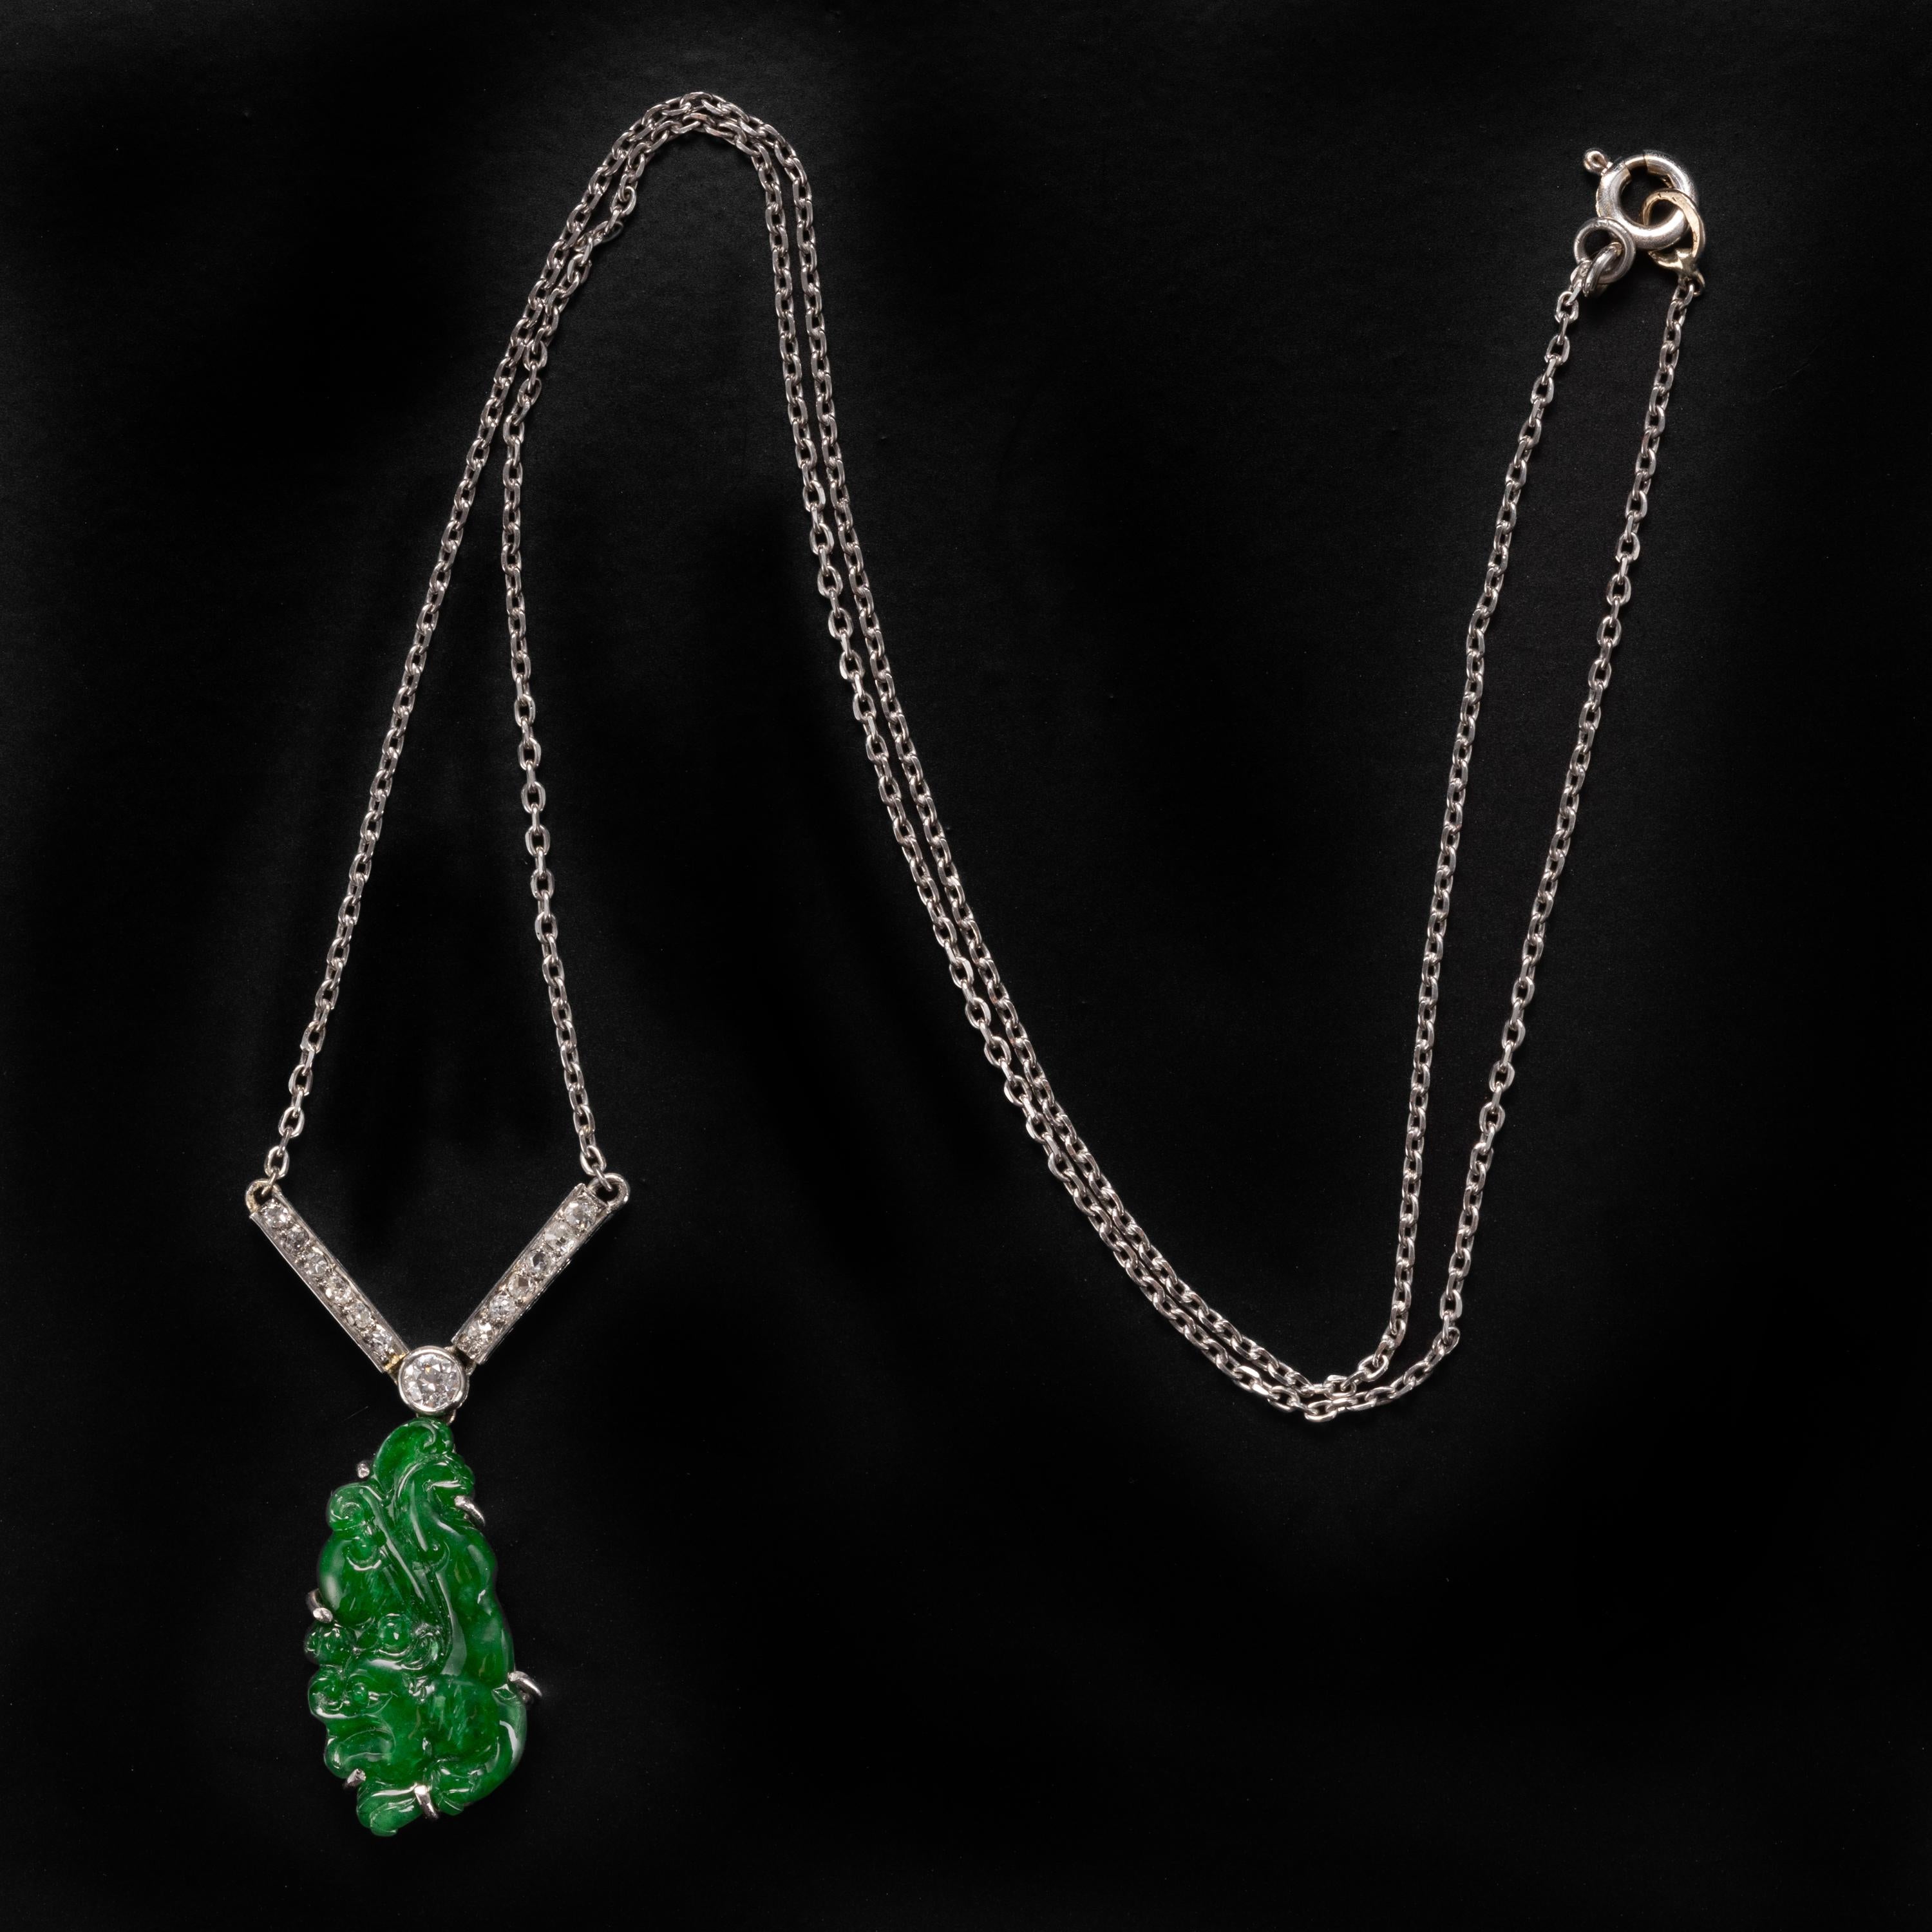 Created in the 1920s, this GIA certified natural and untreated jadeite jade displays a rich, emerald green color and high translucency. Jade this fine is exceedingly rare and is known as 